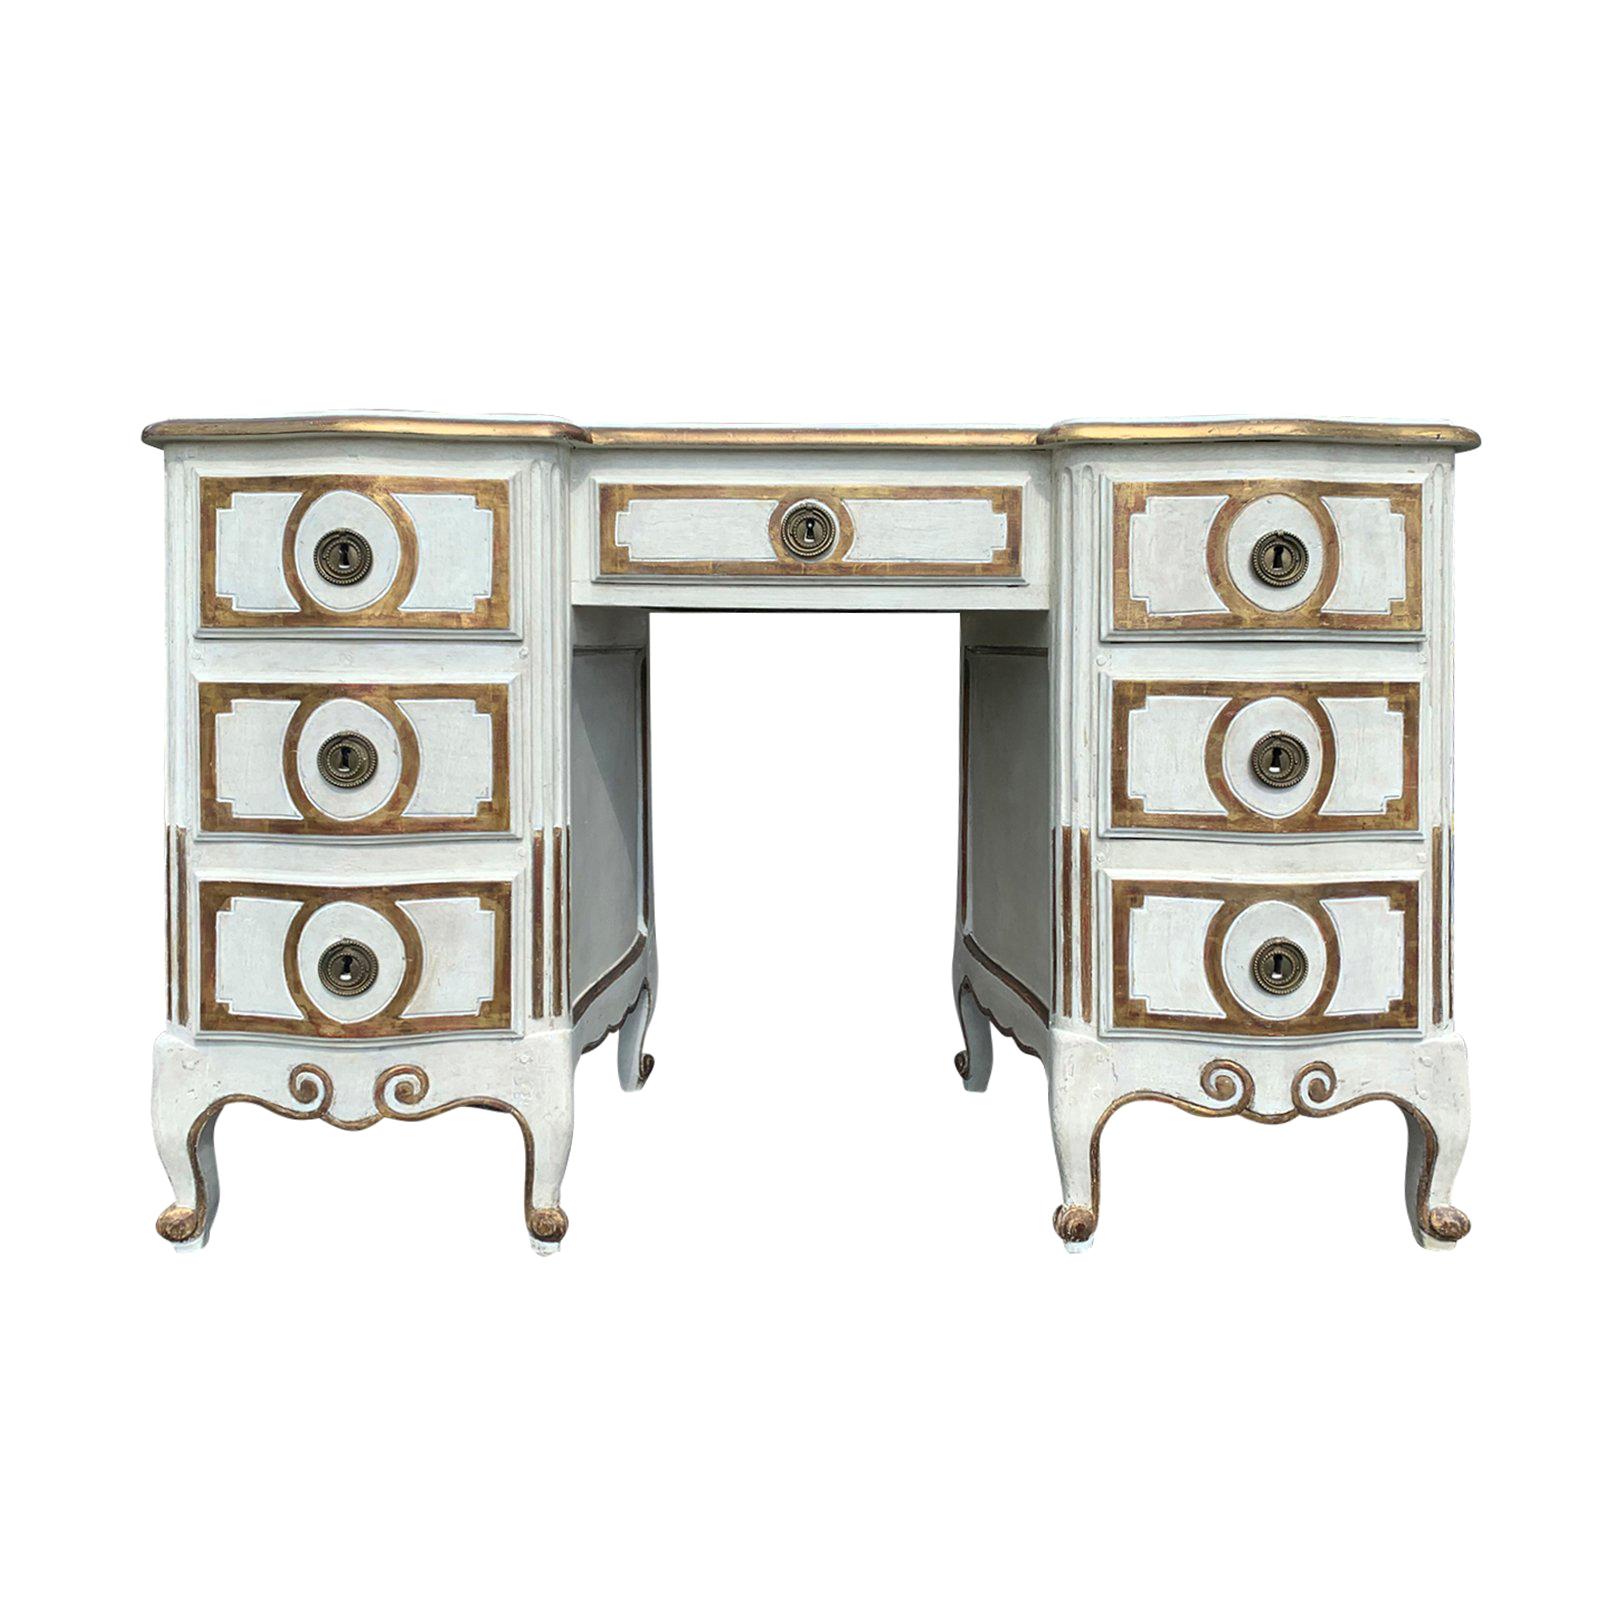 20th Century Italian Dressing Table/Desk, Painted White & Gold